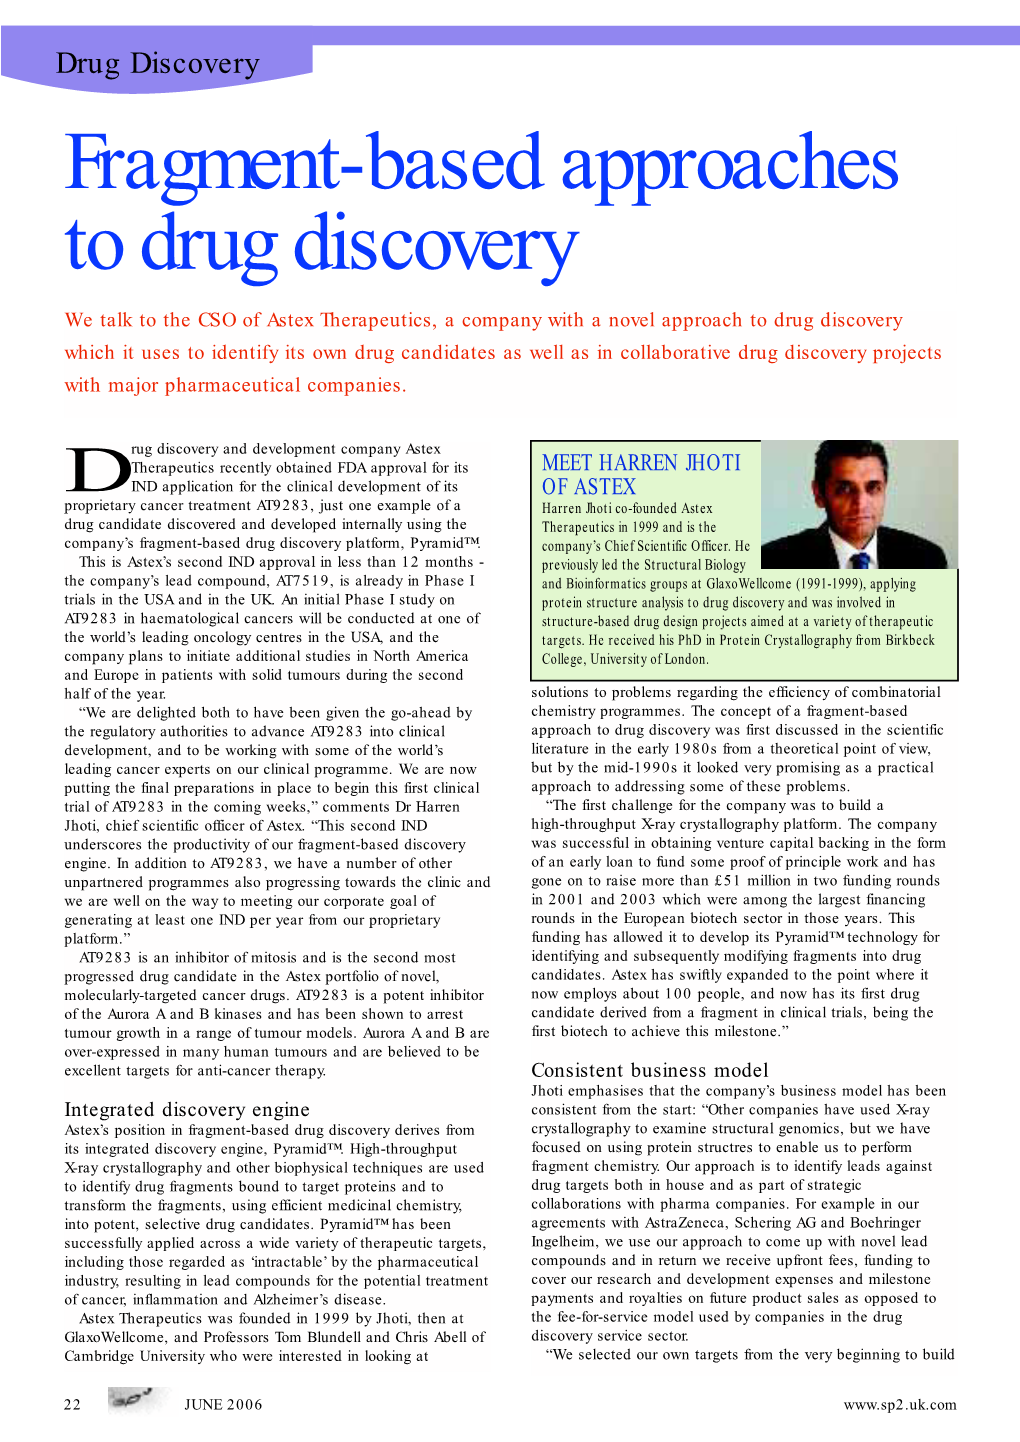 Fragment-Based Approaches to Drug Discovery